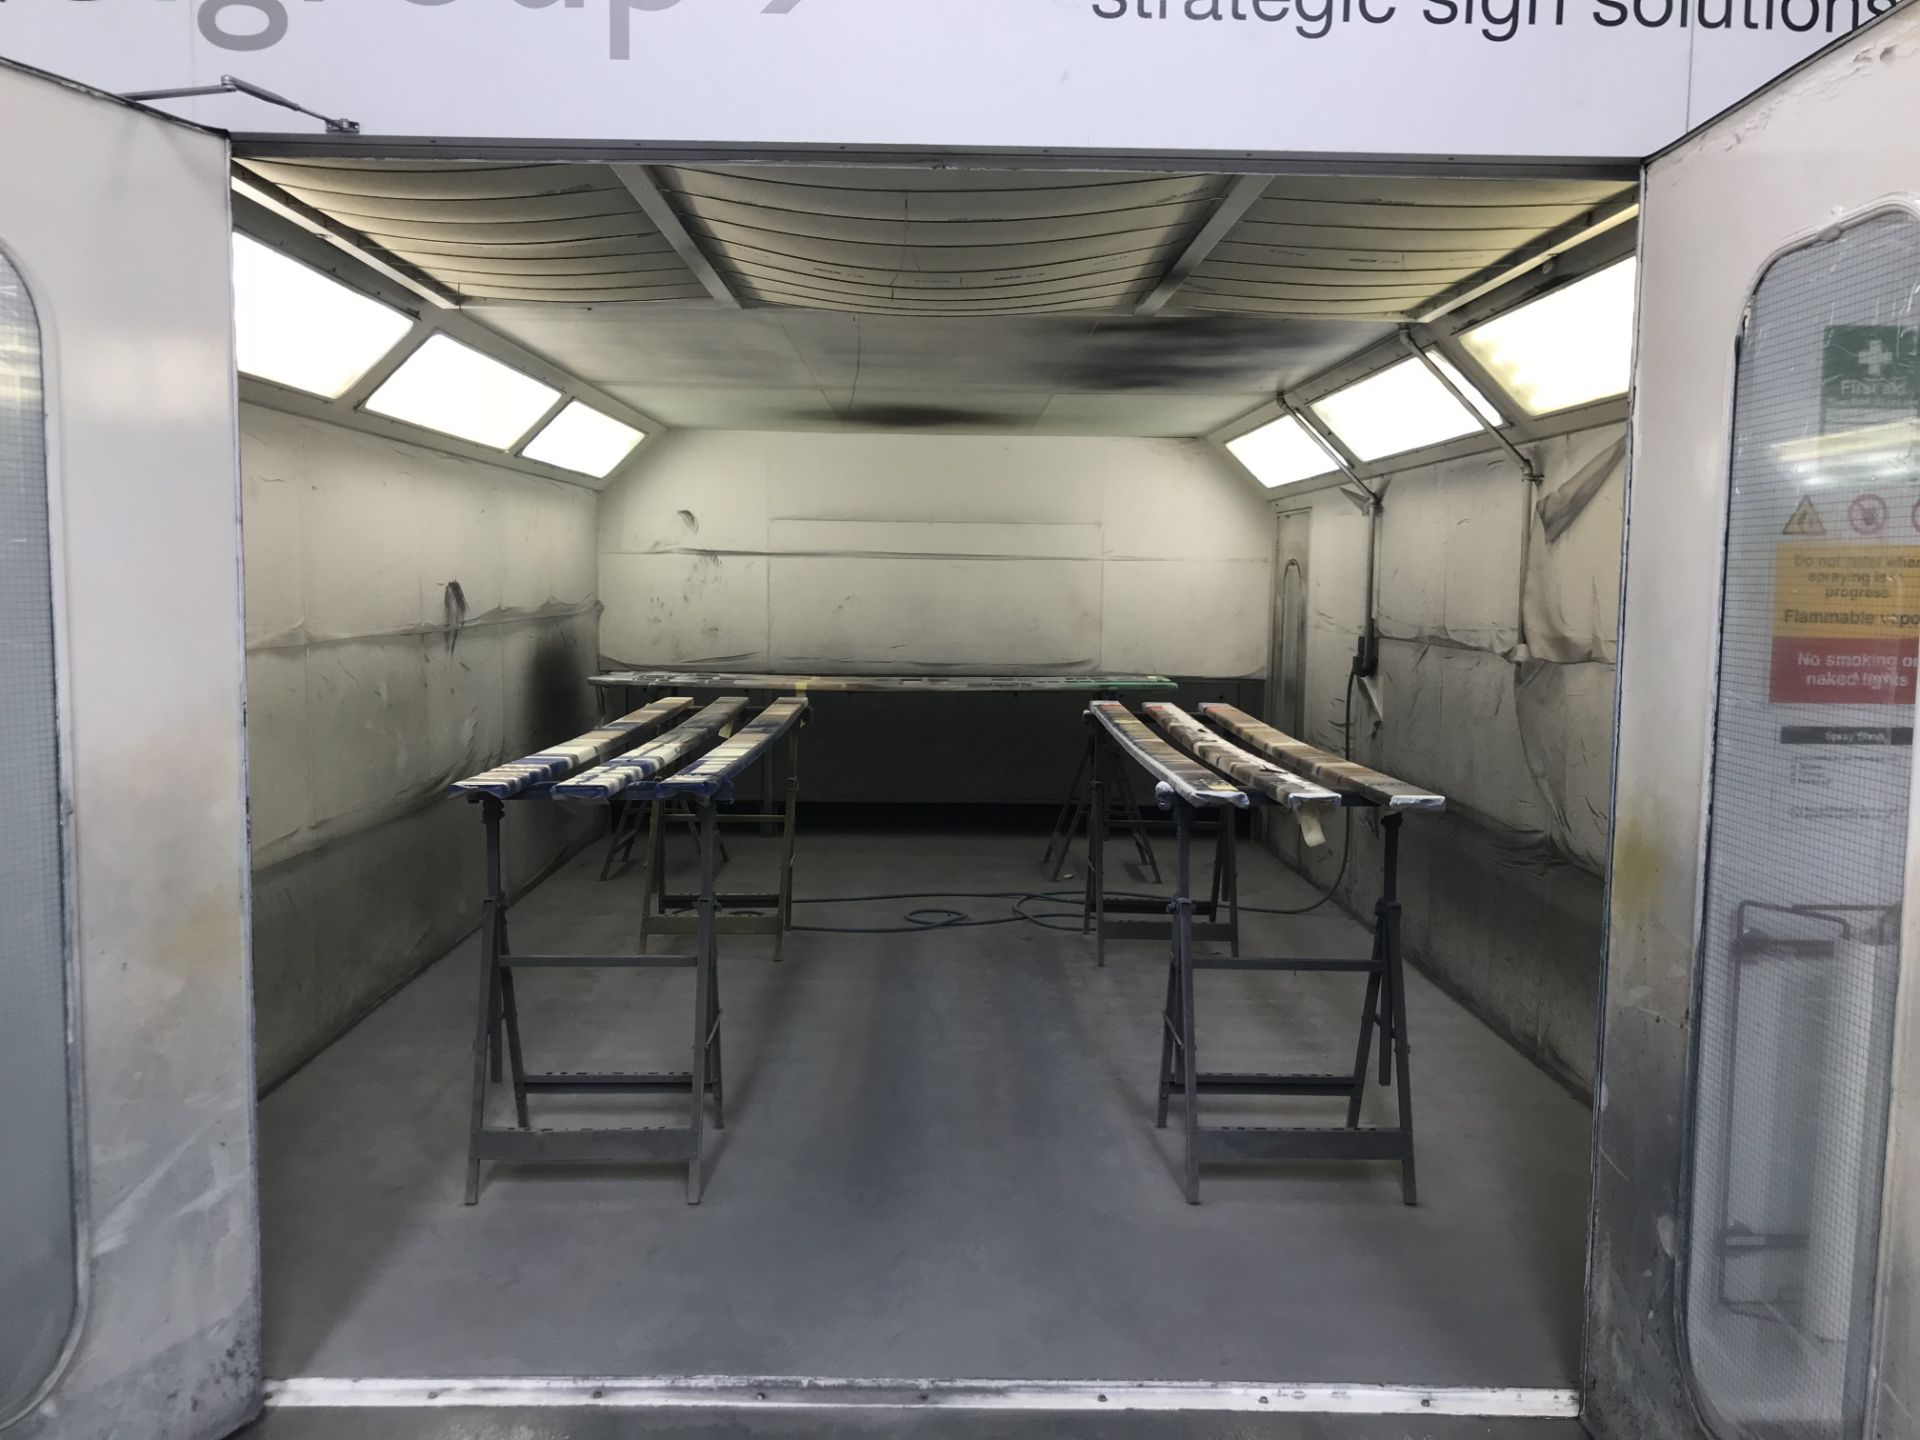 Spray Paint Booth - Internal Length: 6m x 4m x 2.30m - Includes Extraction Unit & Lighting - Image 4 of 11